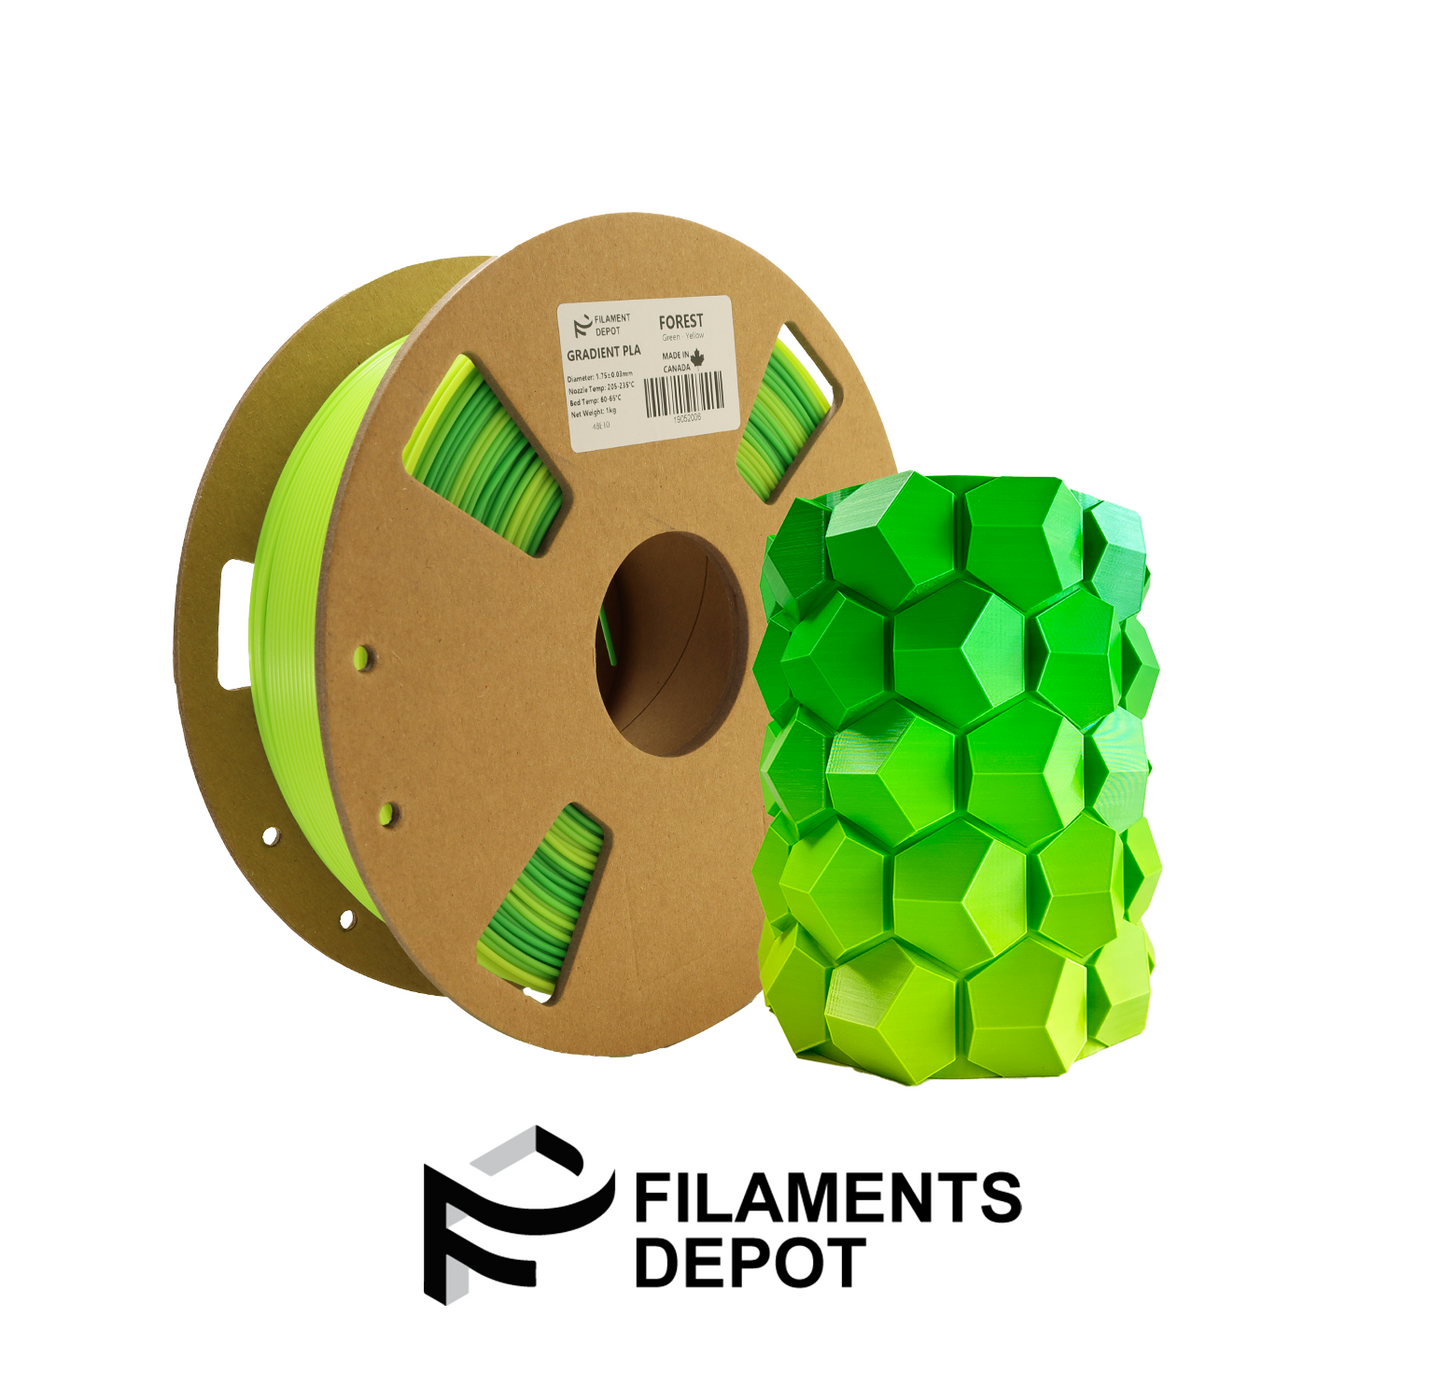 Filaments Depot Gradient PLA - Forest (Green-Yellow)